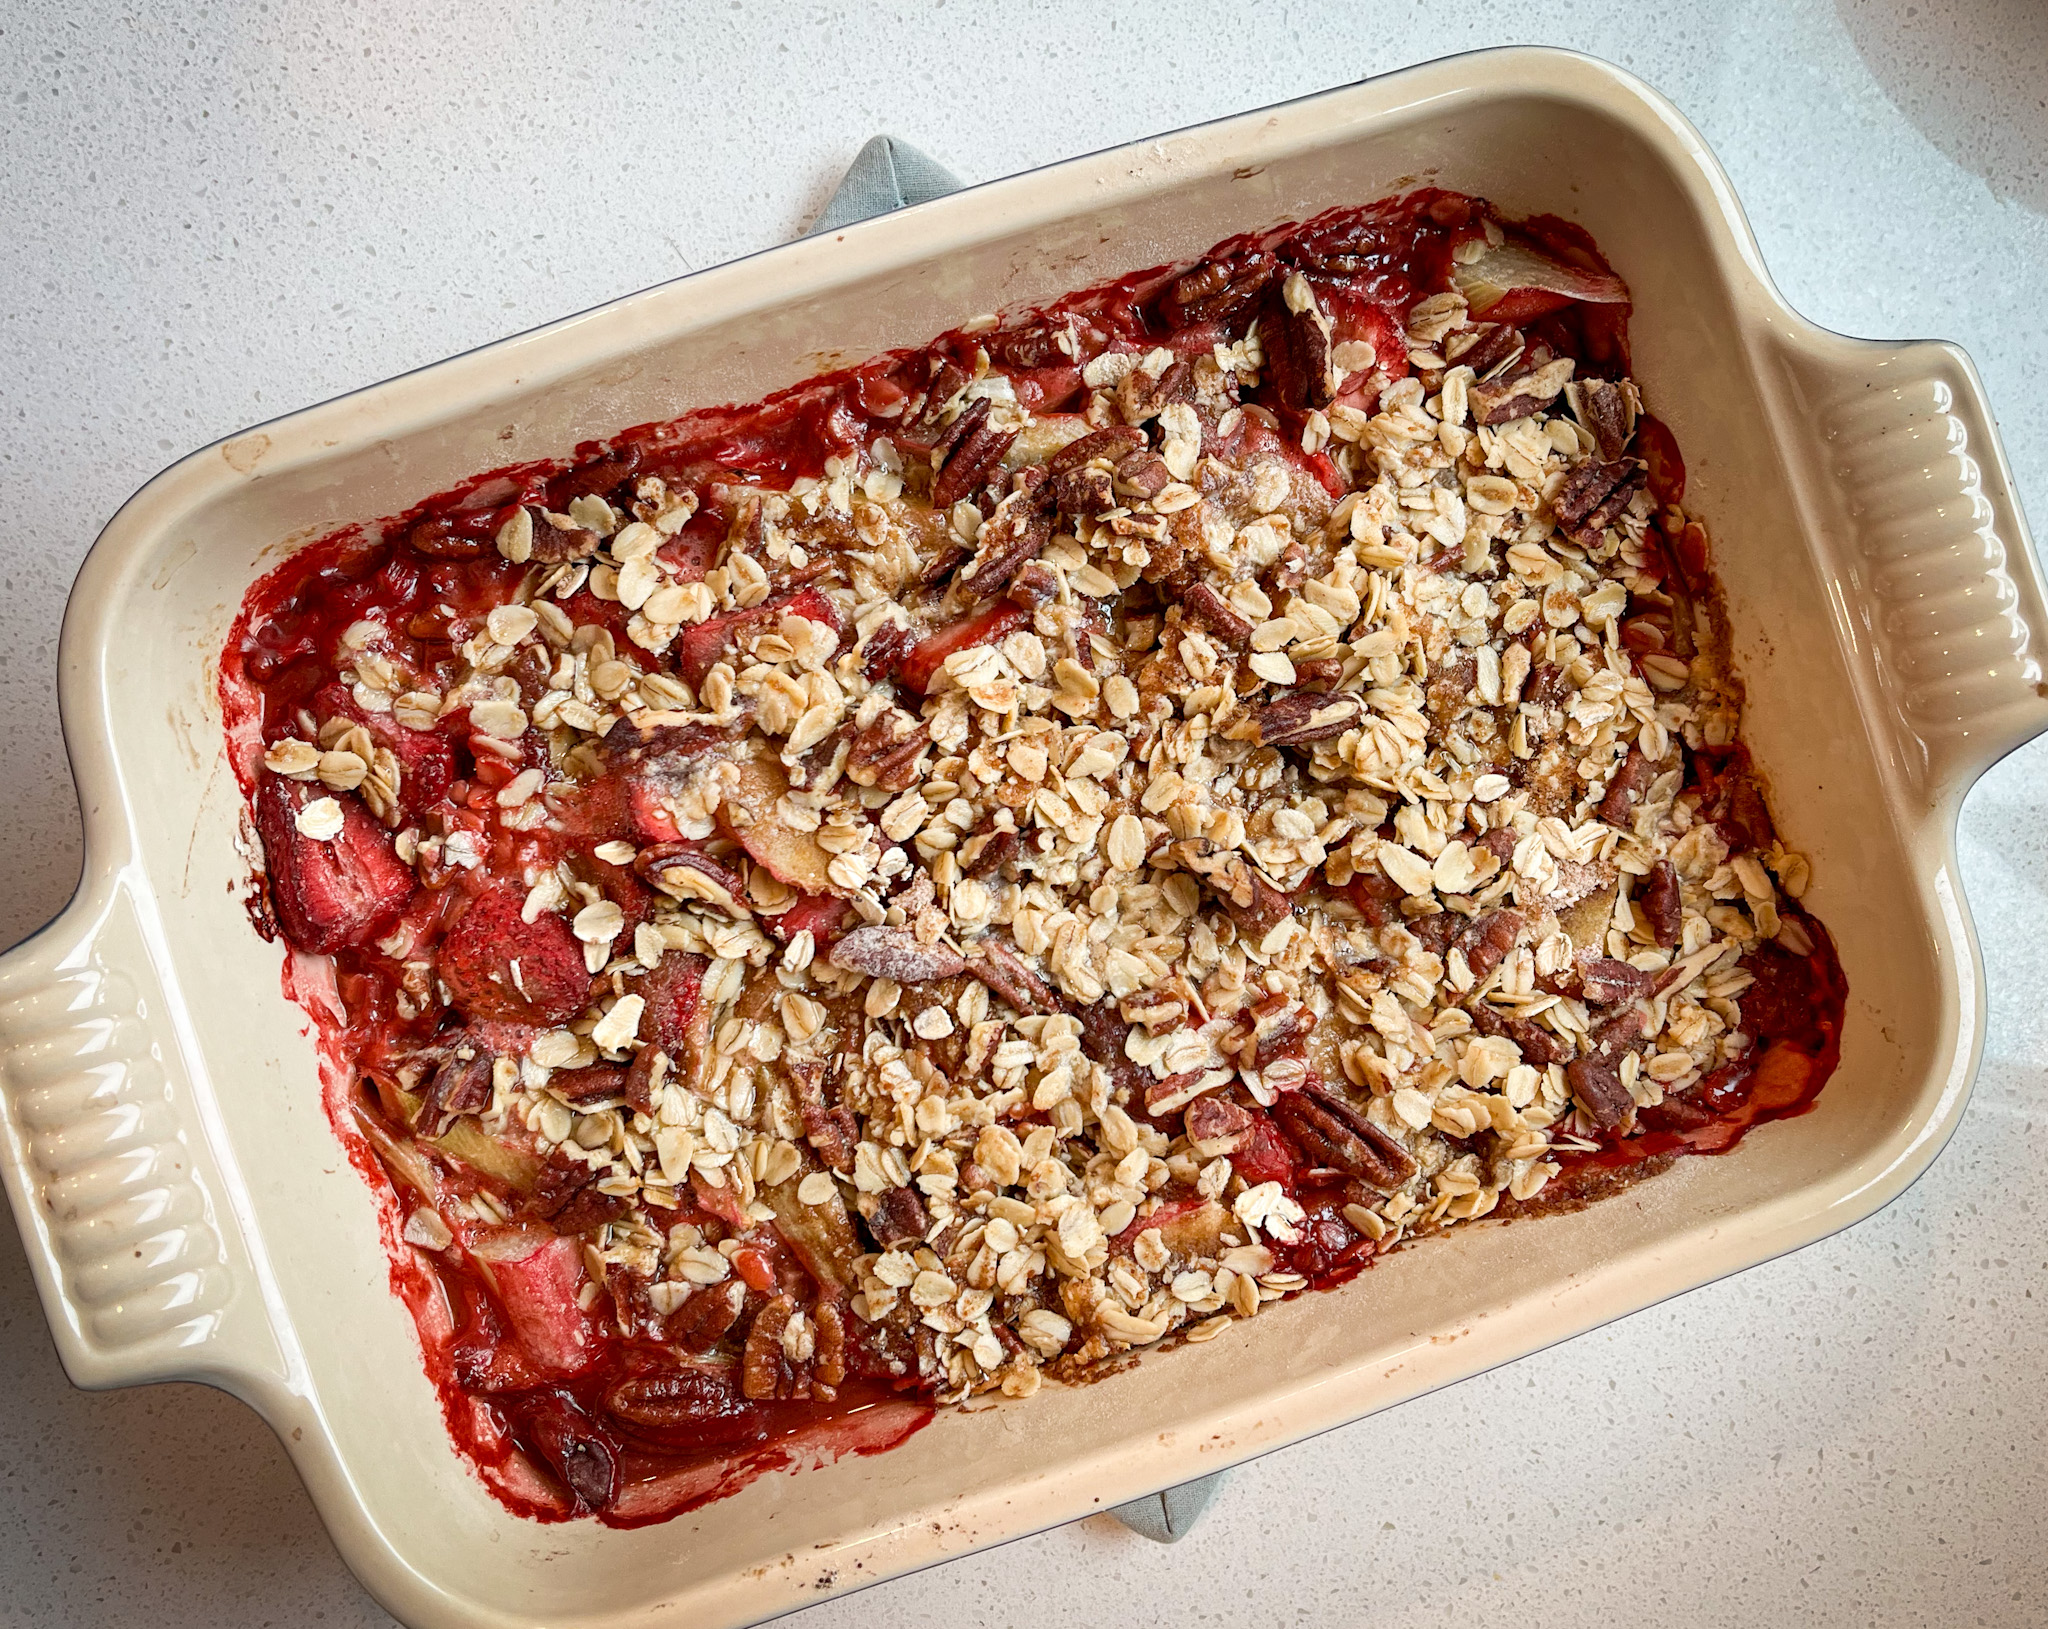 Strawberry Rhubarb Crisp in baking pan with a nut oat crispy topping